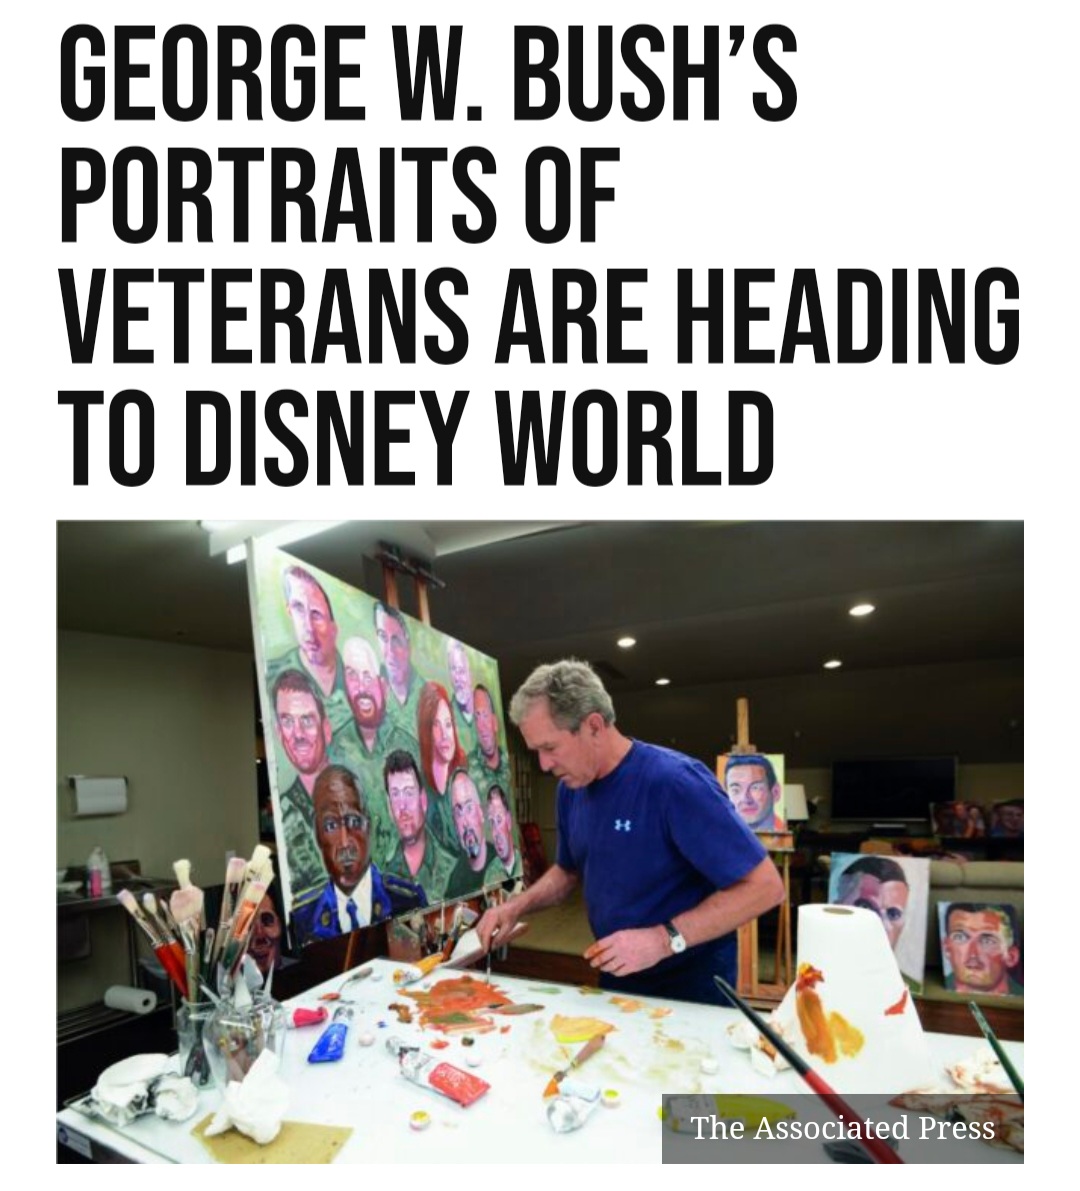 How many people, exactly, do you think will buy tickets to Disney World -- but wouldn't have done so if Dubya's paintings weren't on display there?